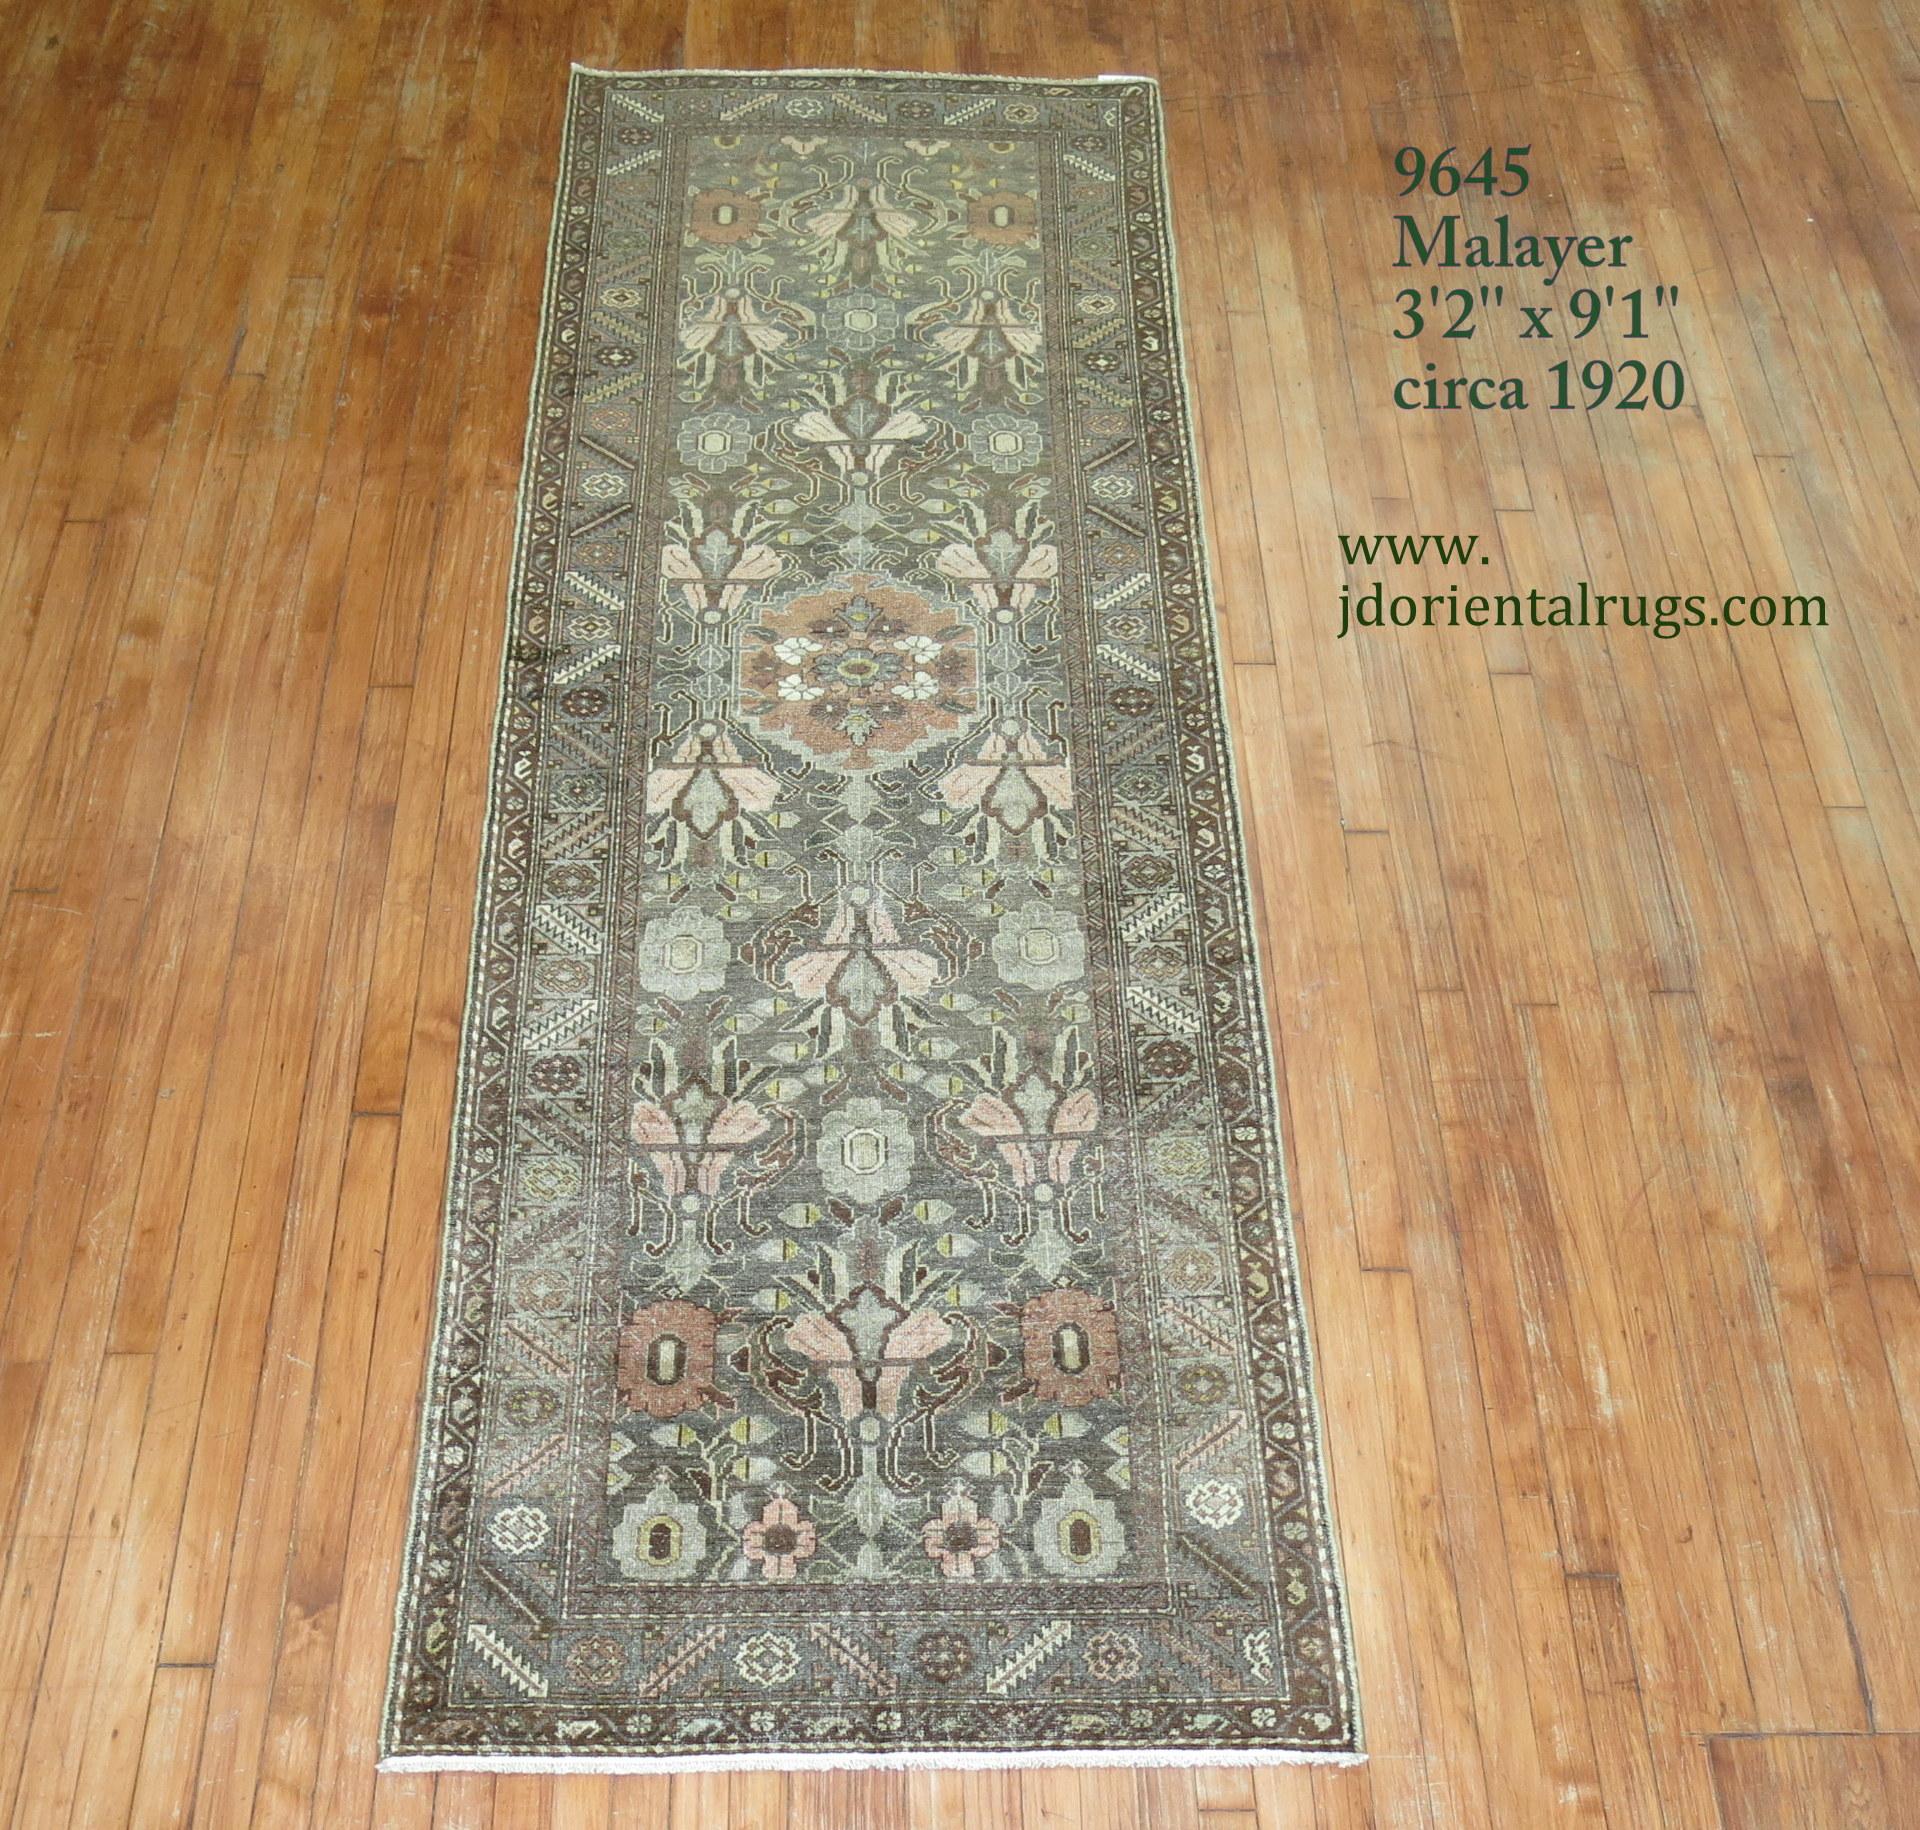 Early 20th century Persian Malayer rug. Predominantly in brown, charcoal, gray accents, circa 1920.

Measures: 3'2